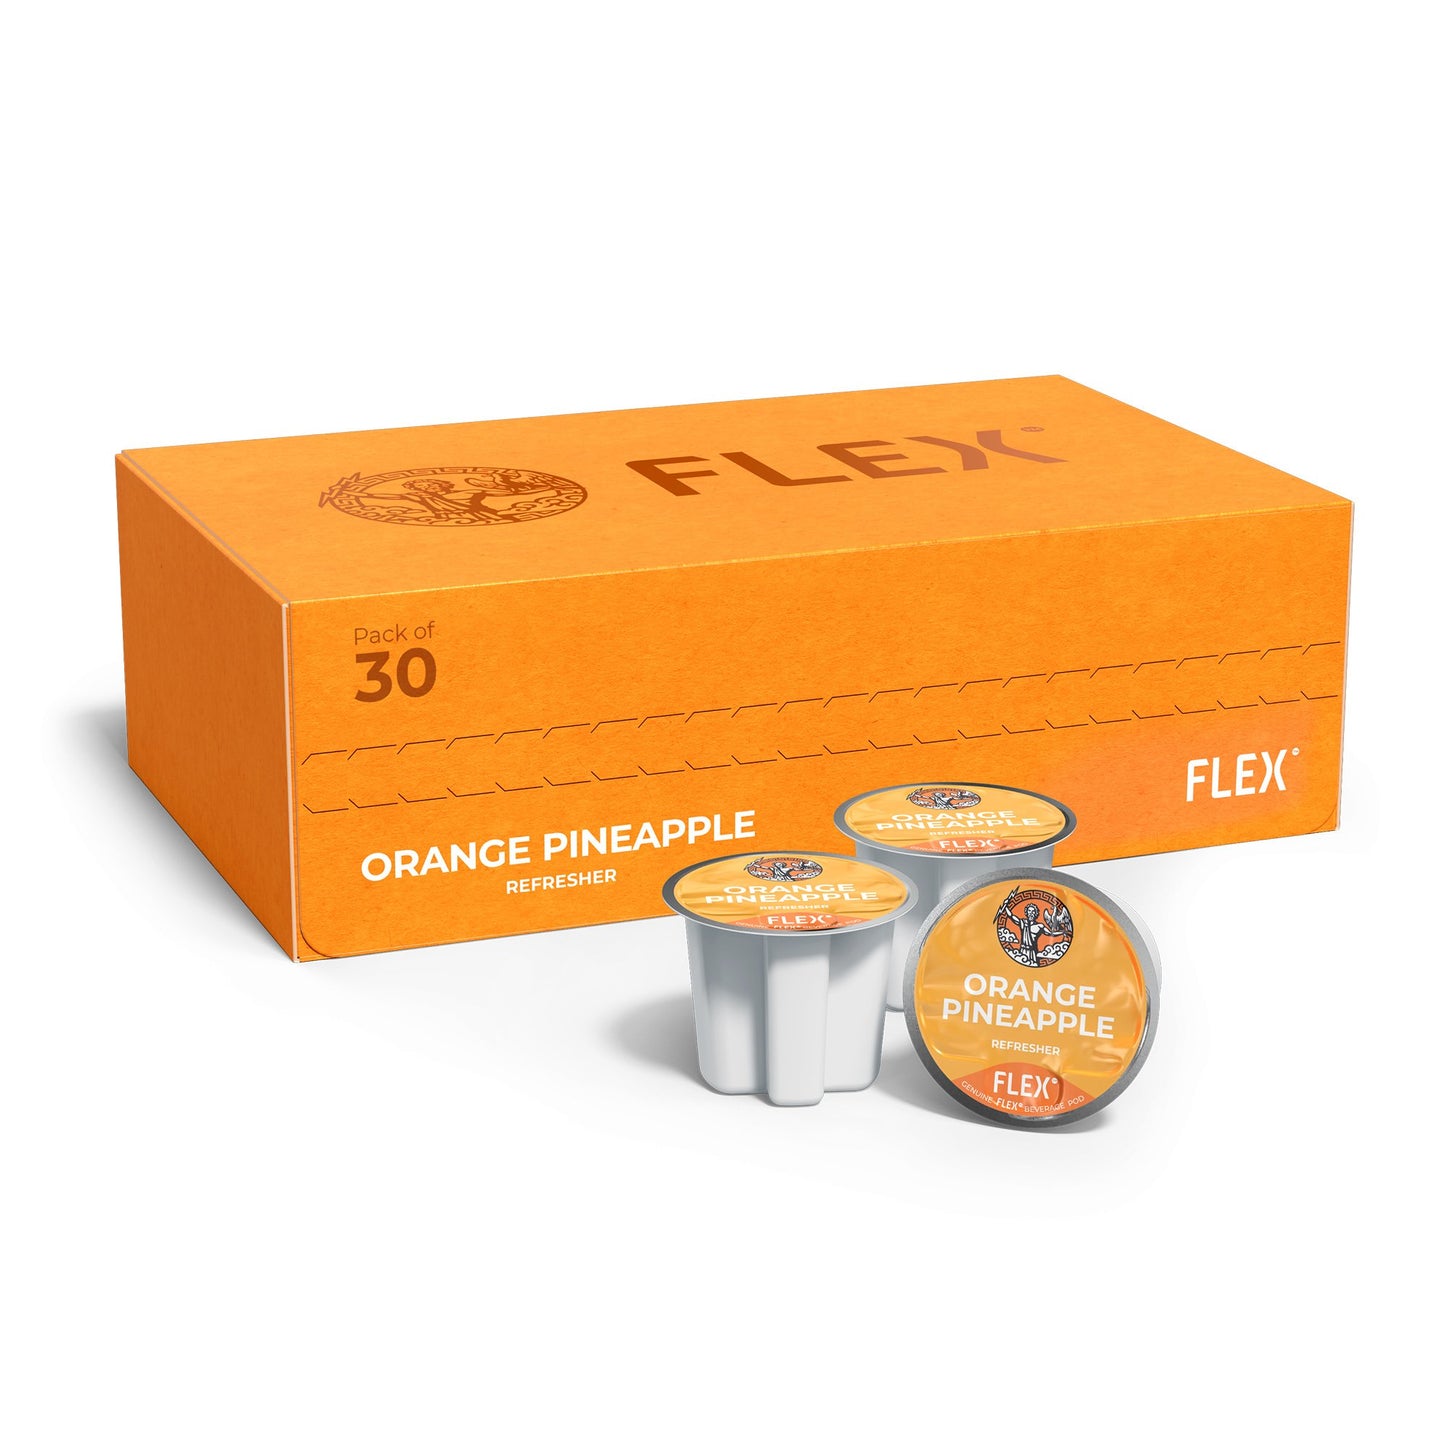 Box for a pack of 30 FLEXFUEL™ Orange Pineapple Refresher pods, sporting a vibrant orange background with the iconic FLEX logo of Zeus and an eagle, symbolizing a refreshing fusion of citrus and tropical flavors.